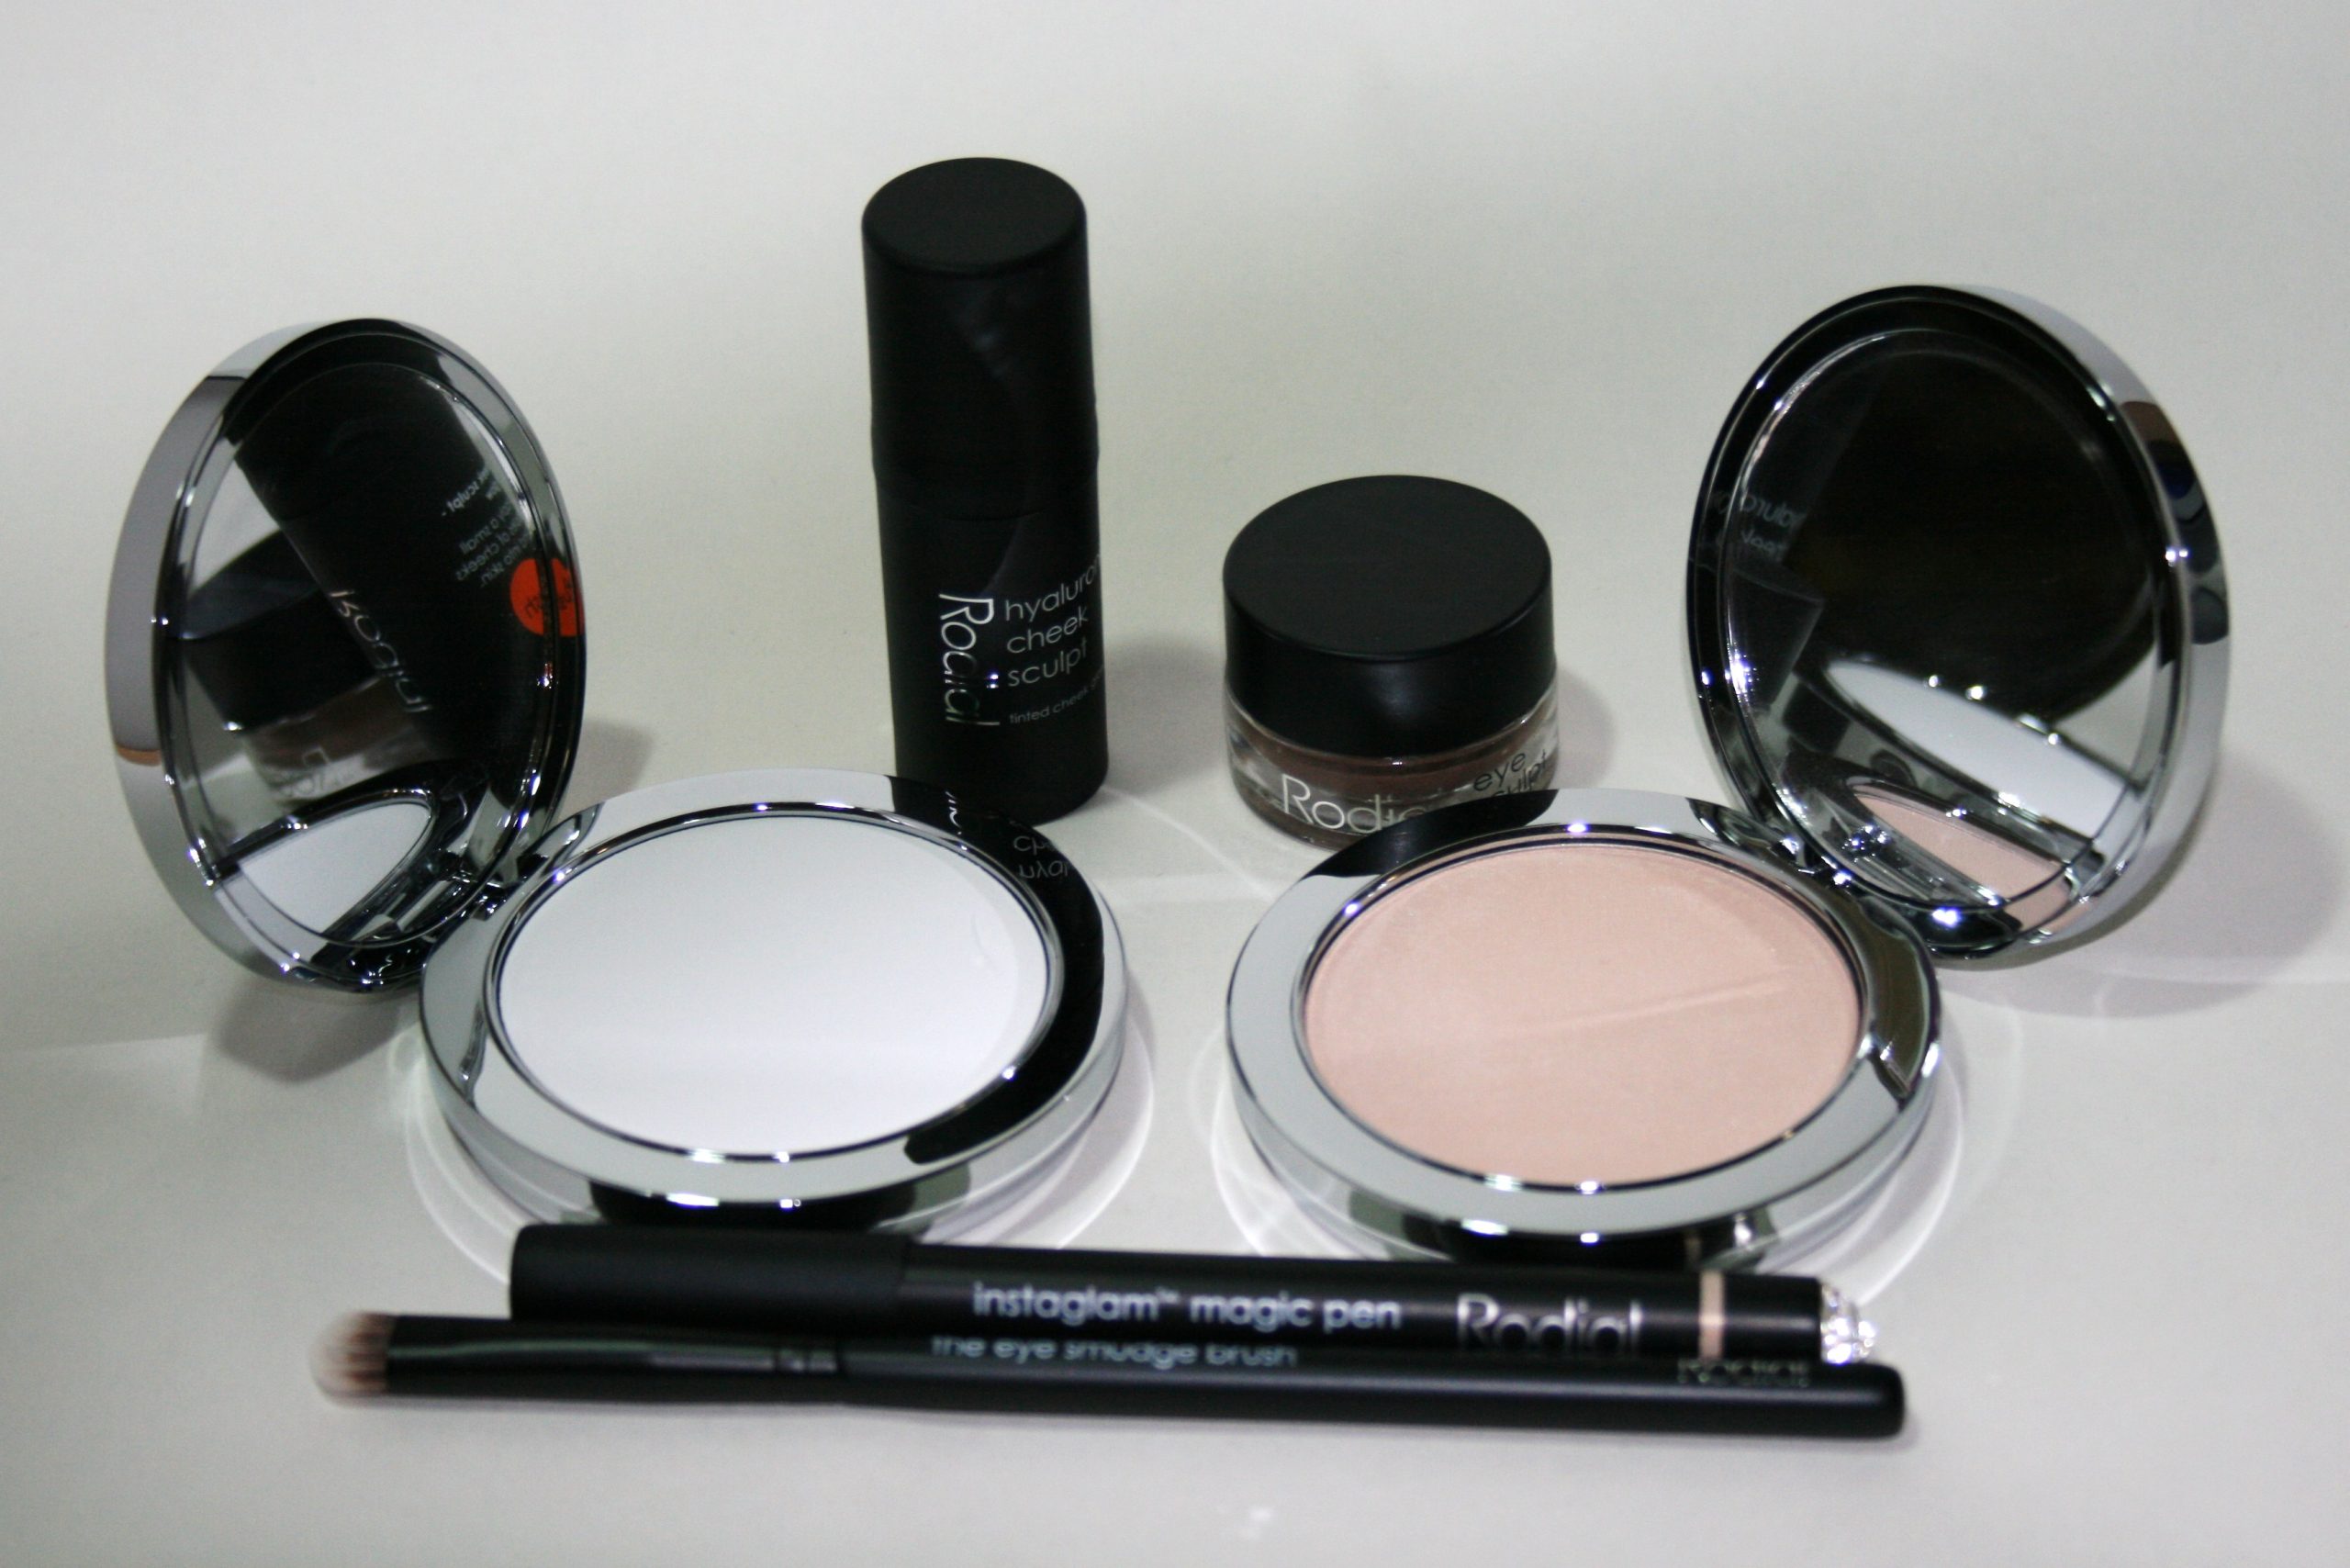 A Quick Intro to Rodial Make-Up